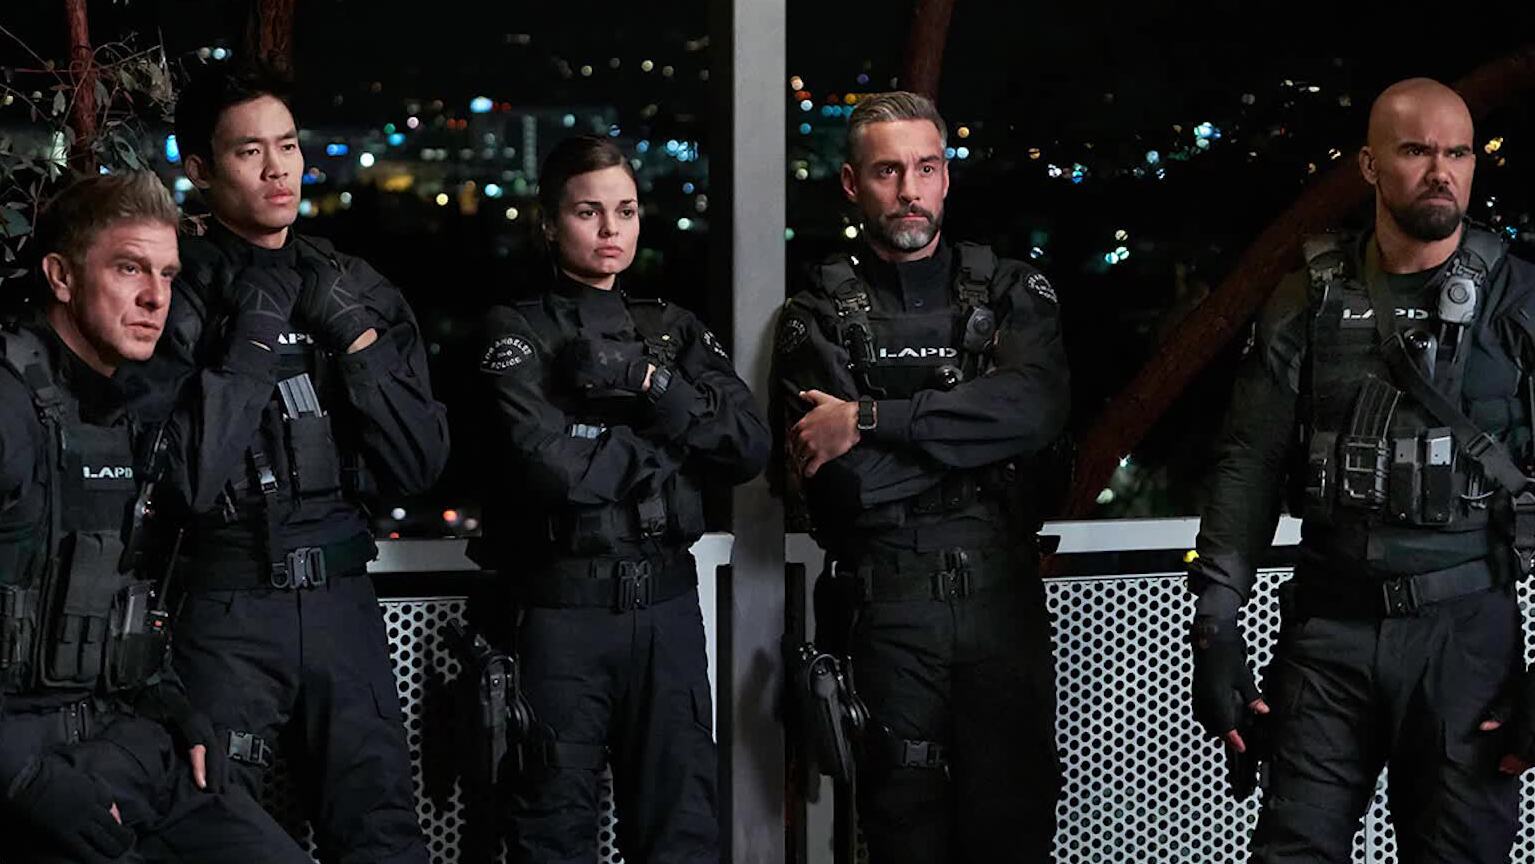 S.W.A.T. season 7: Plot, release window, and more